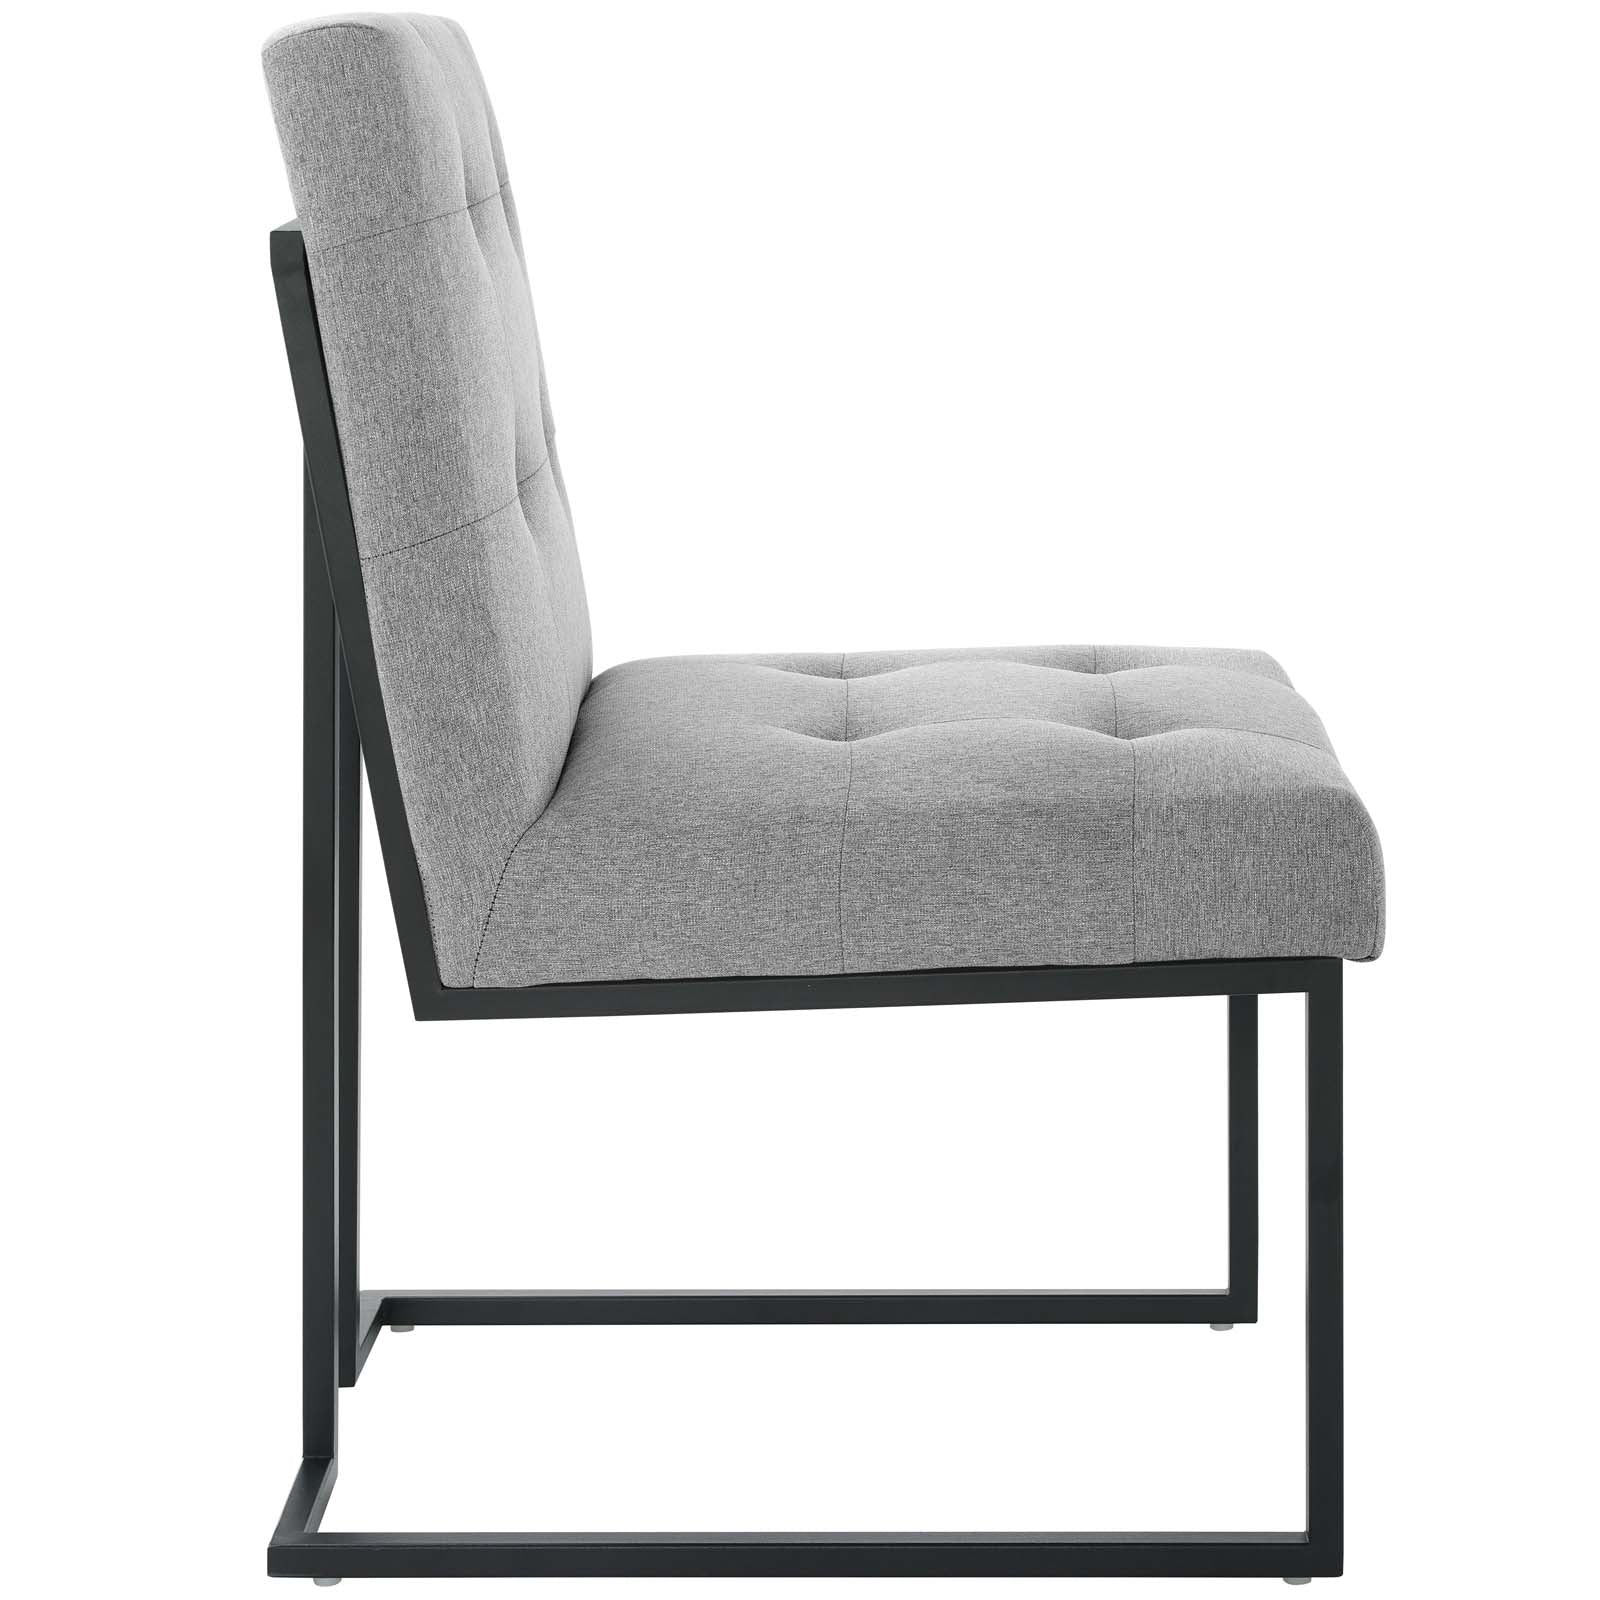 Modway Dining Chairs - Privy Black Stainless Steel Upholstered Fabric Dining Chair Black Light Gray